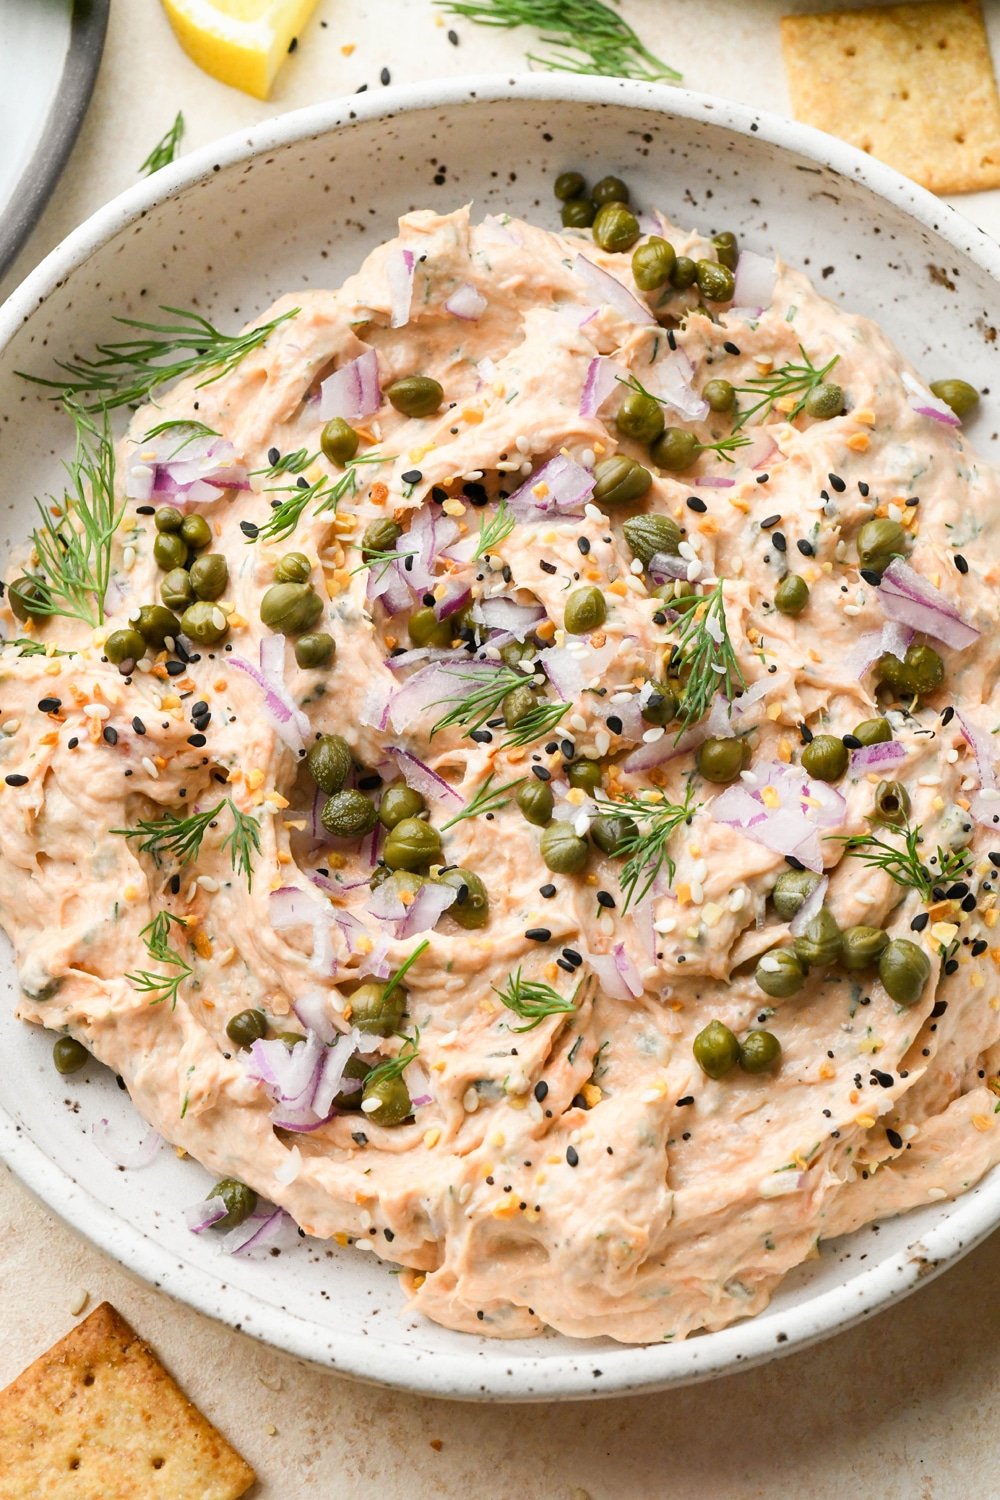 Dairy free smoked salmon dip in a small shallow ceramic speckled bowl, garnished with capers, fresh dill, everything but the bagel seasoning.